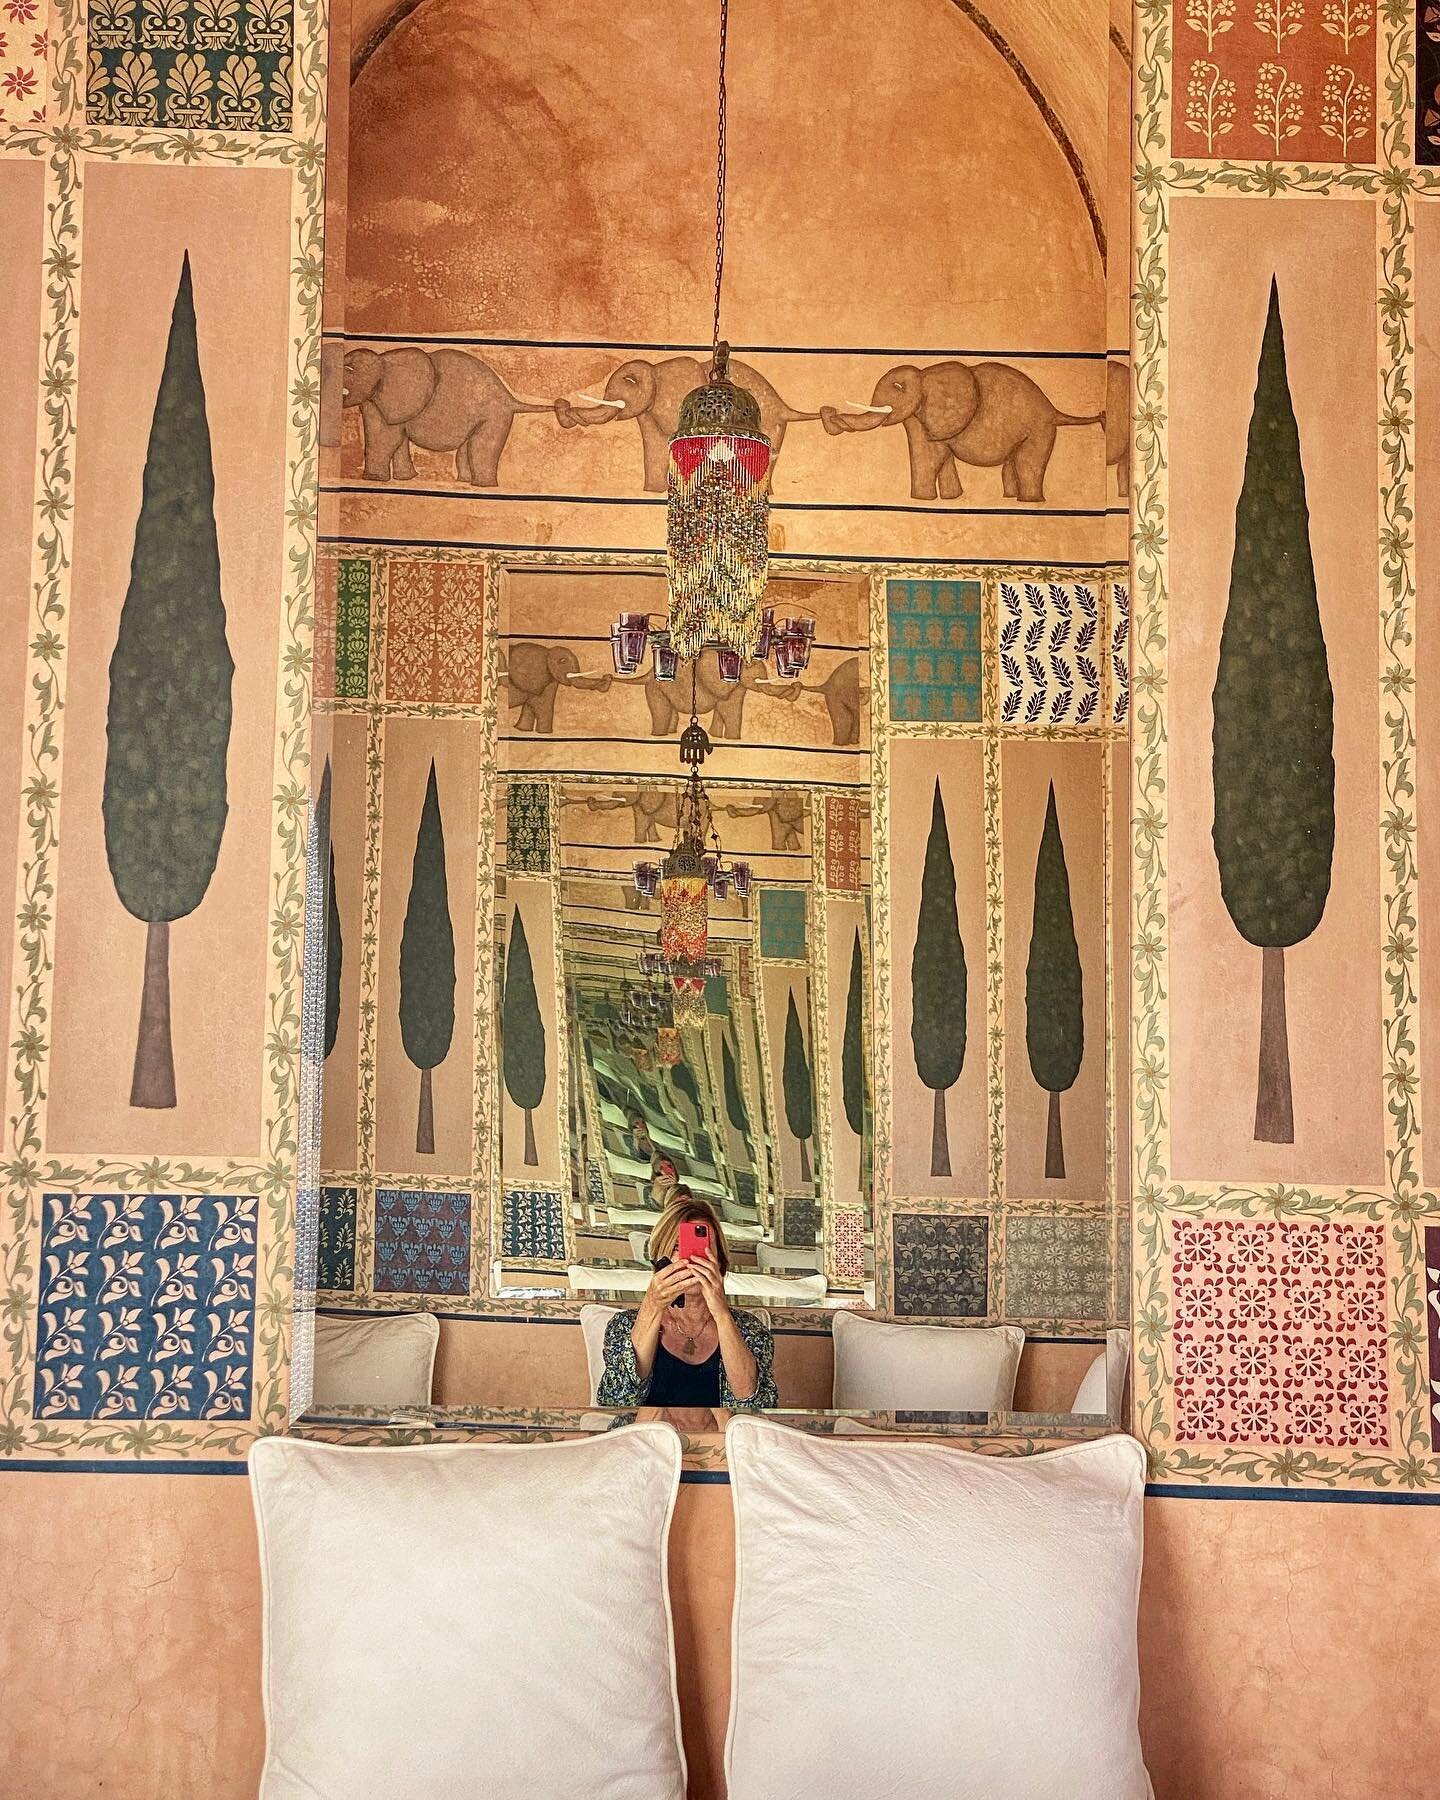 Marrakech: a tale of two worlds. Here, you can find &ldquo;real life&rdquo; Marrakech and &ldquo;French Fantasy&rdquo;Marrakech. Personally, I enjoy the experience of it all. This was a gorgeous escape for a garden lunch. Welcome to @hotel_les_deux_t